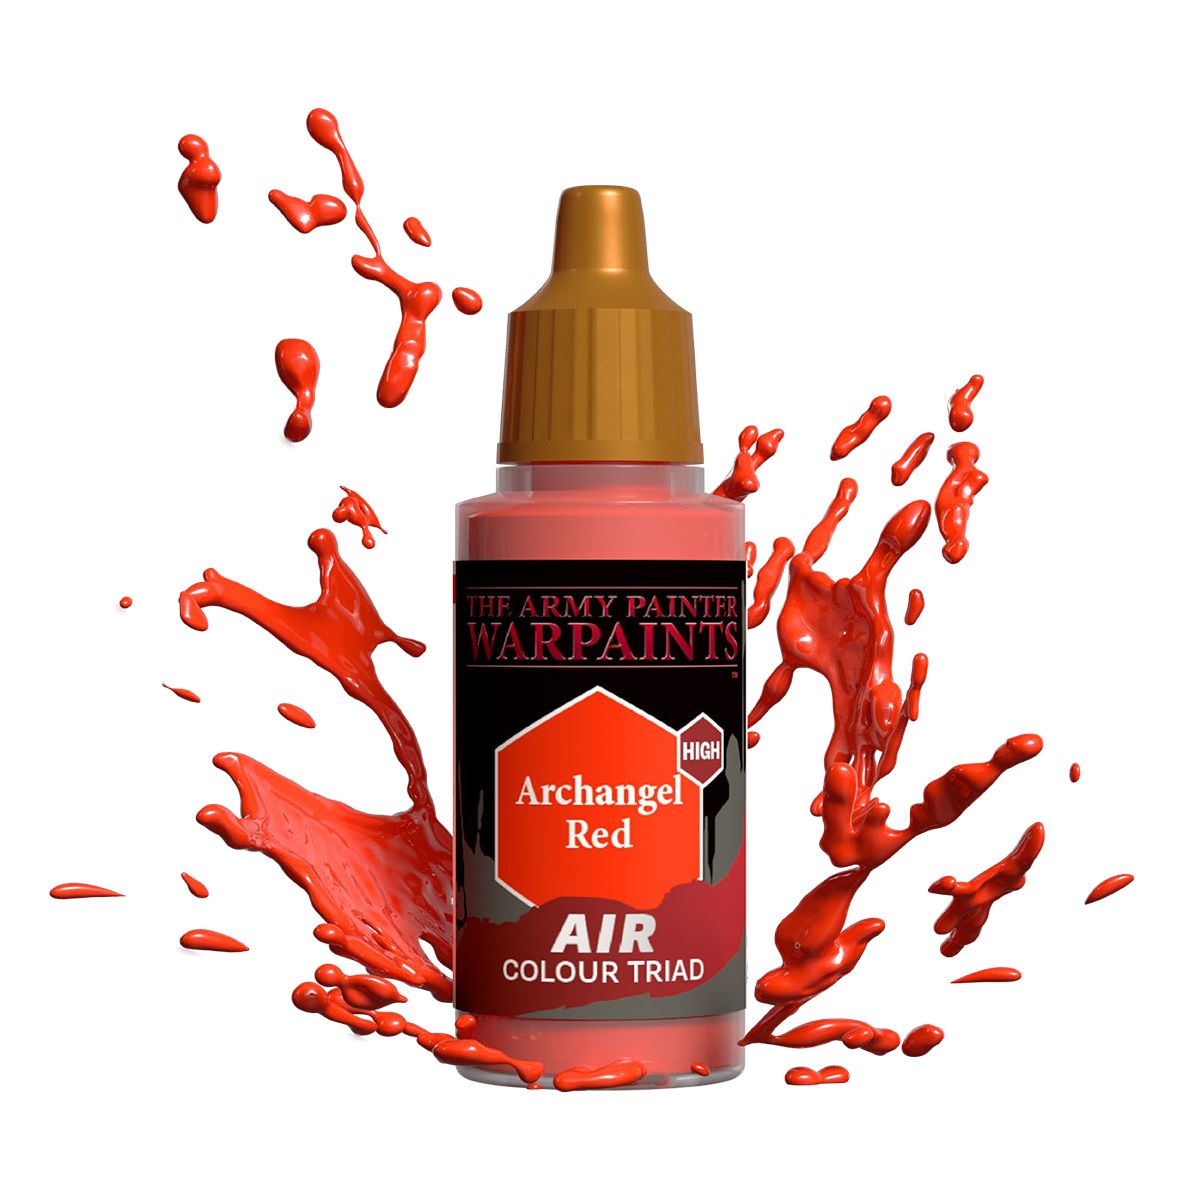 Army Painter Warpaints - Air Archangel Red Acrylic Paint 18ml